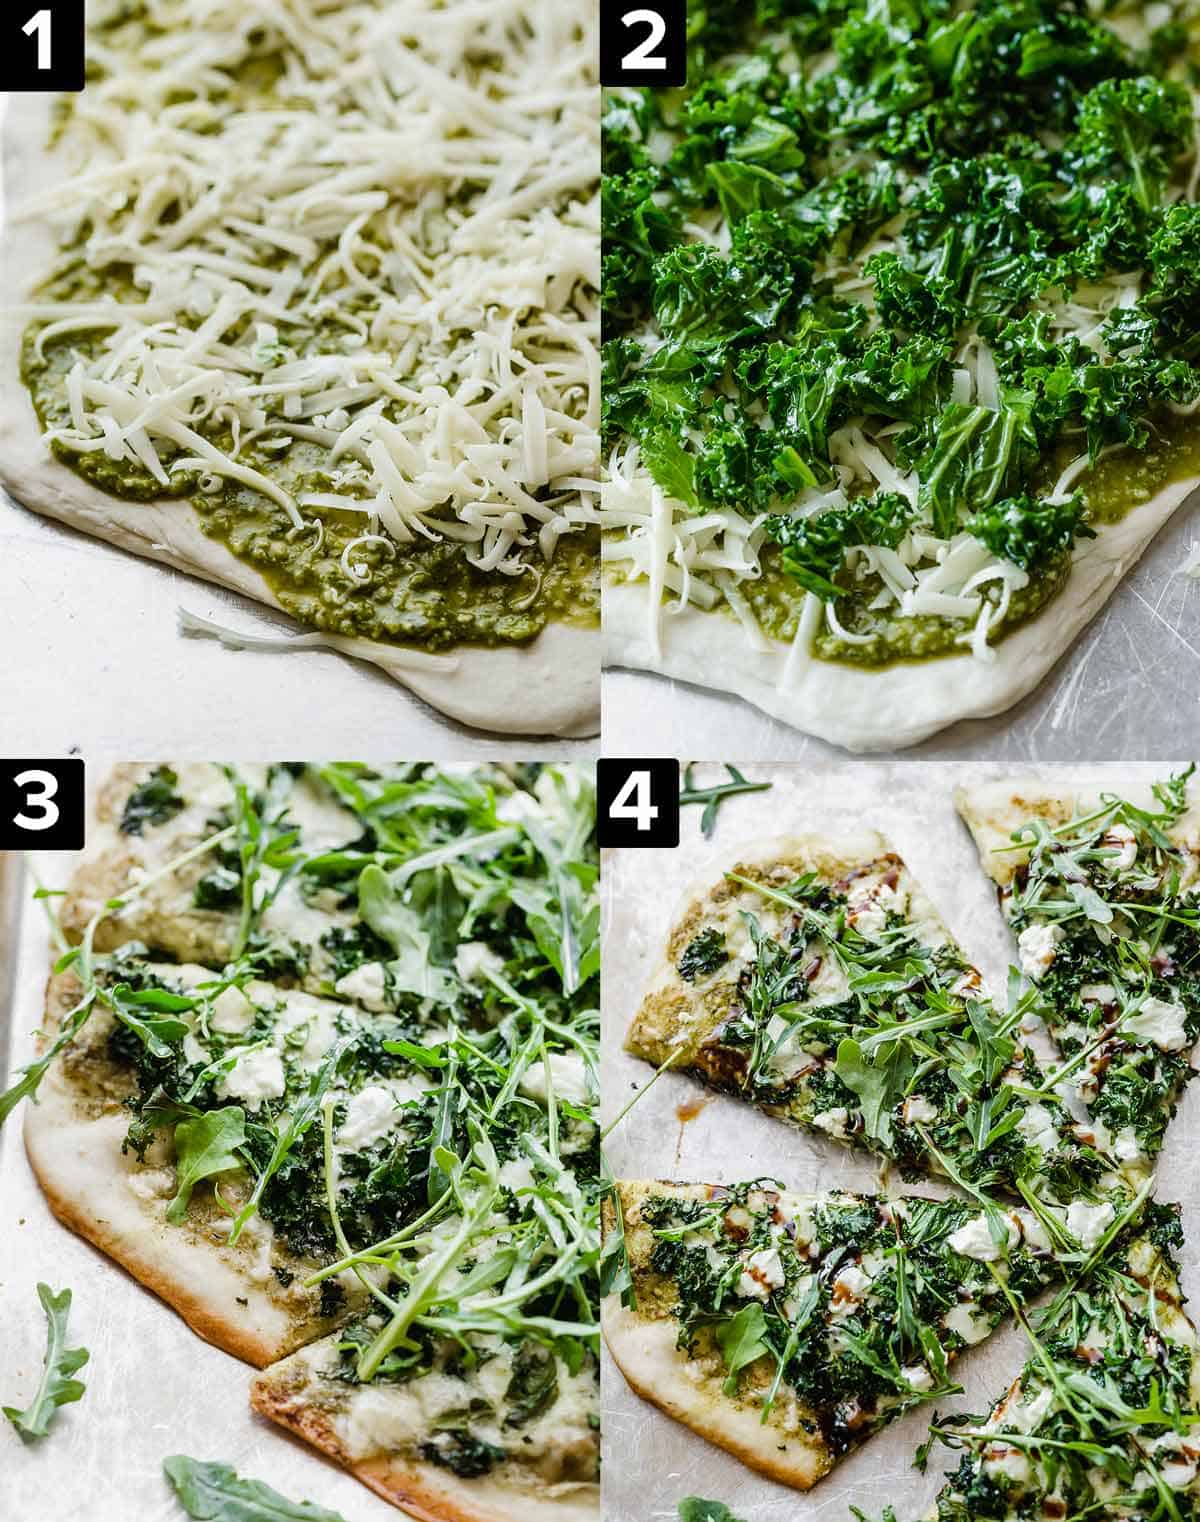 Four images showing the process of making a kale pizza.